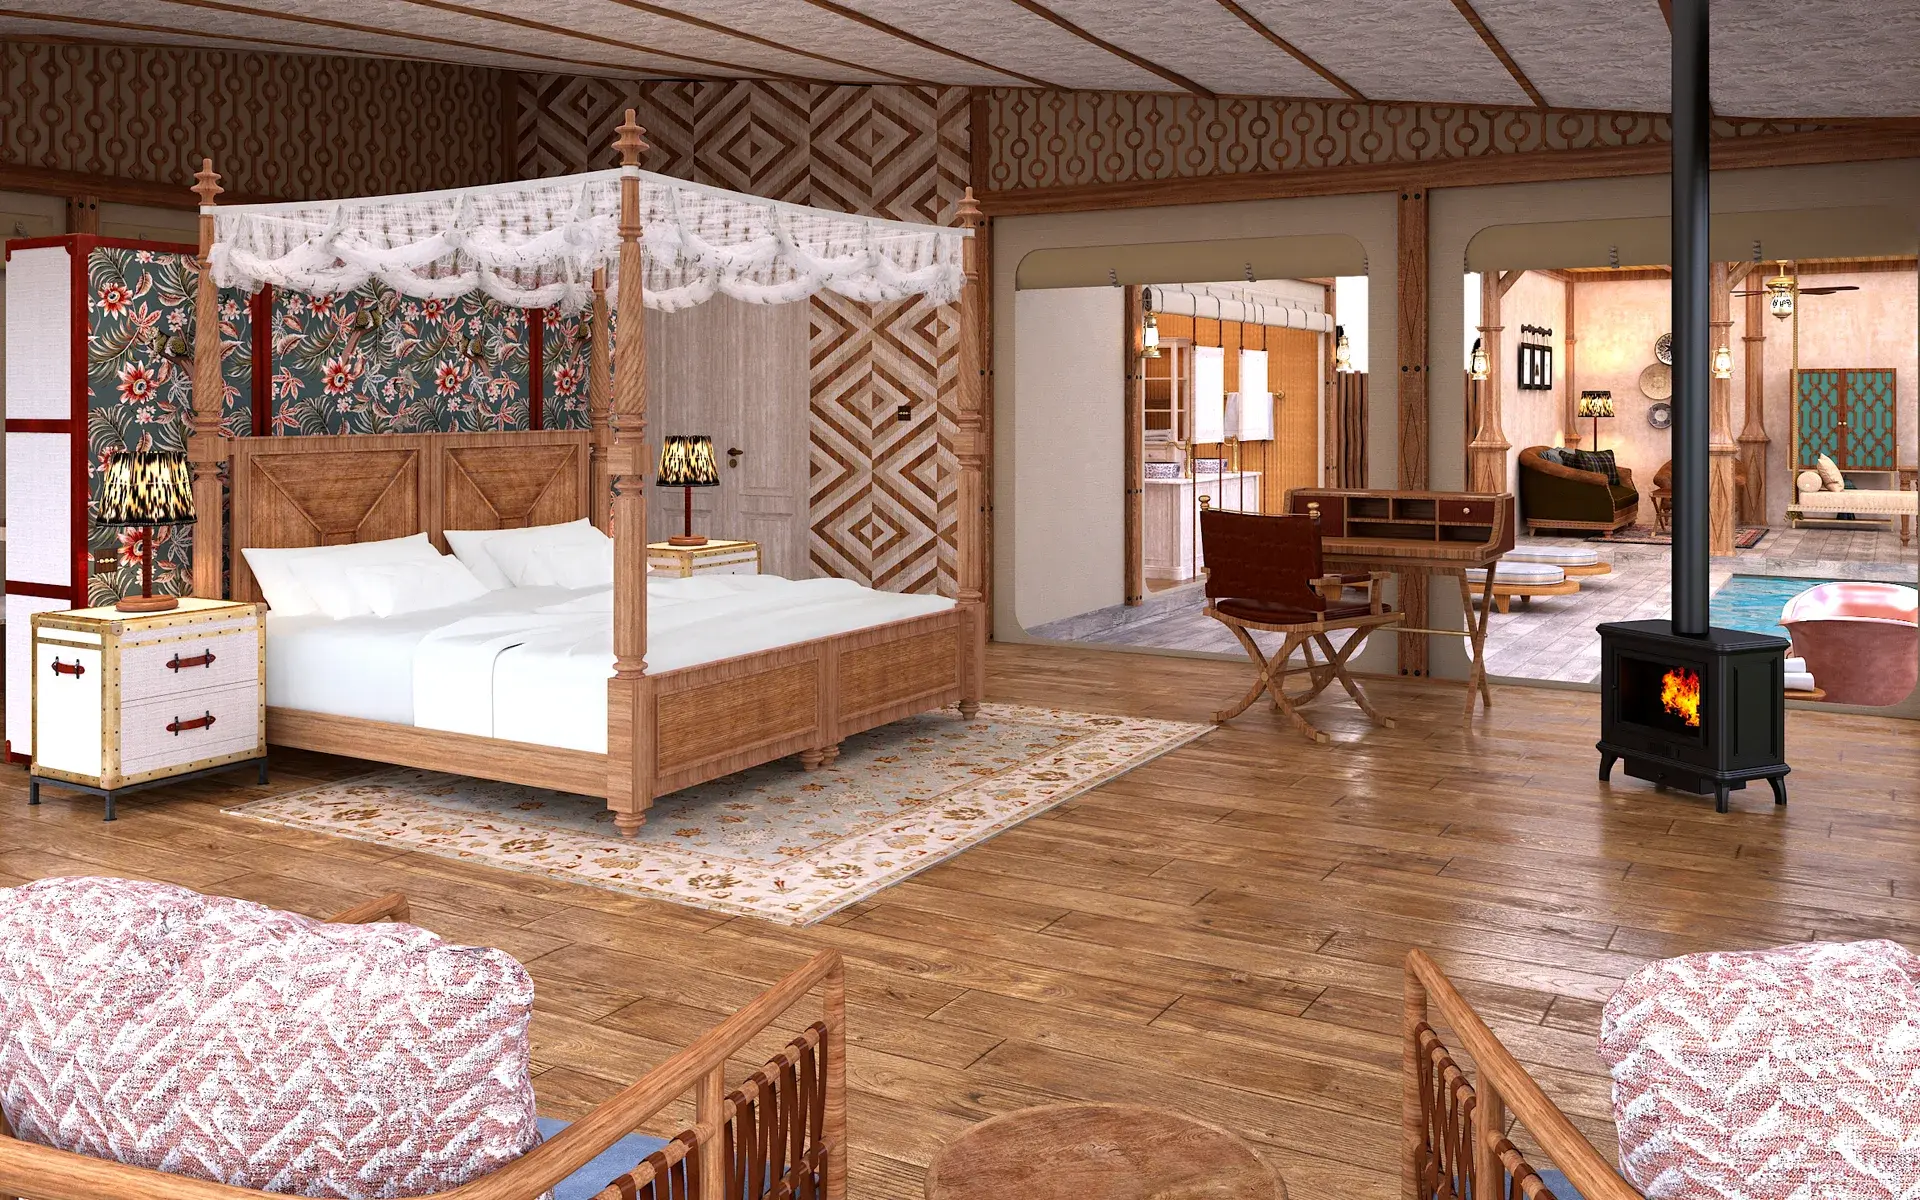 One-bedroom luxury villa at One Nature Mara River in the Northern Serengeti.